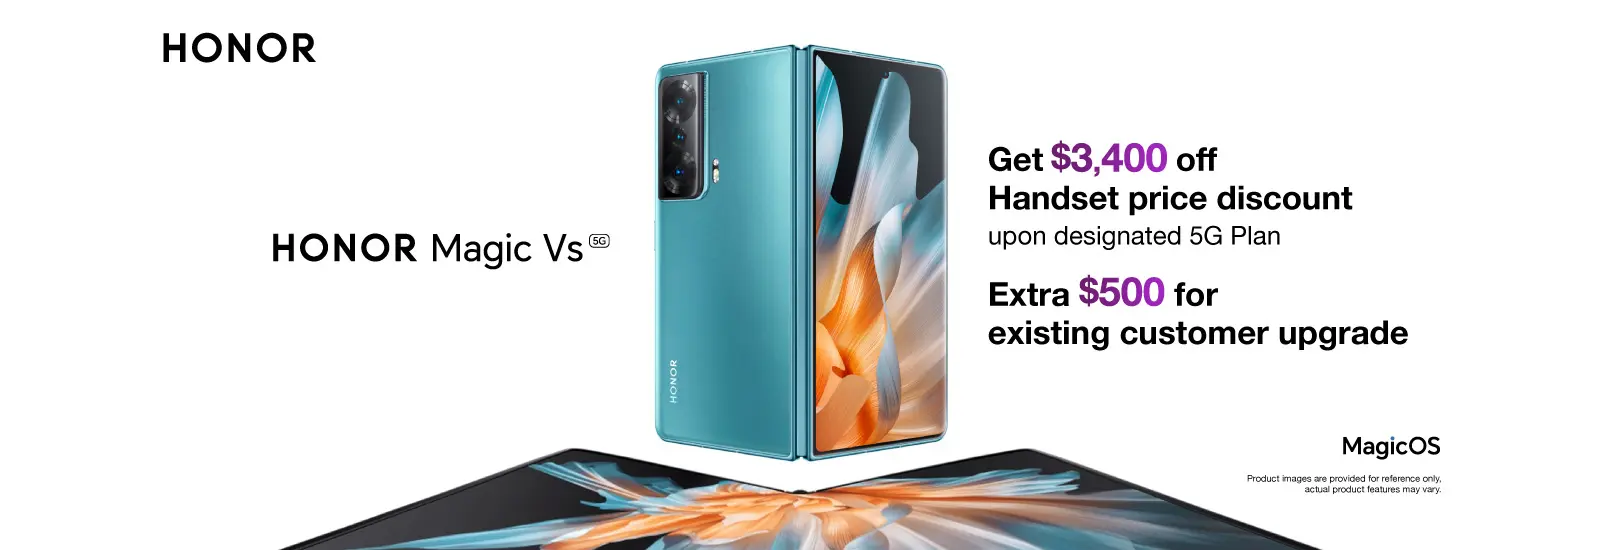 HONOR Magic Vs 5G Specifications